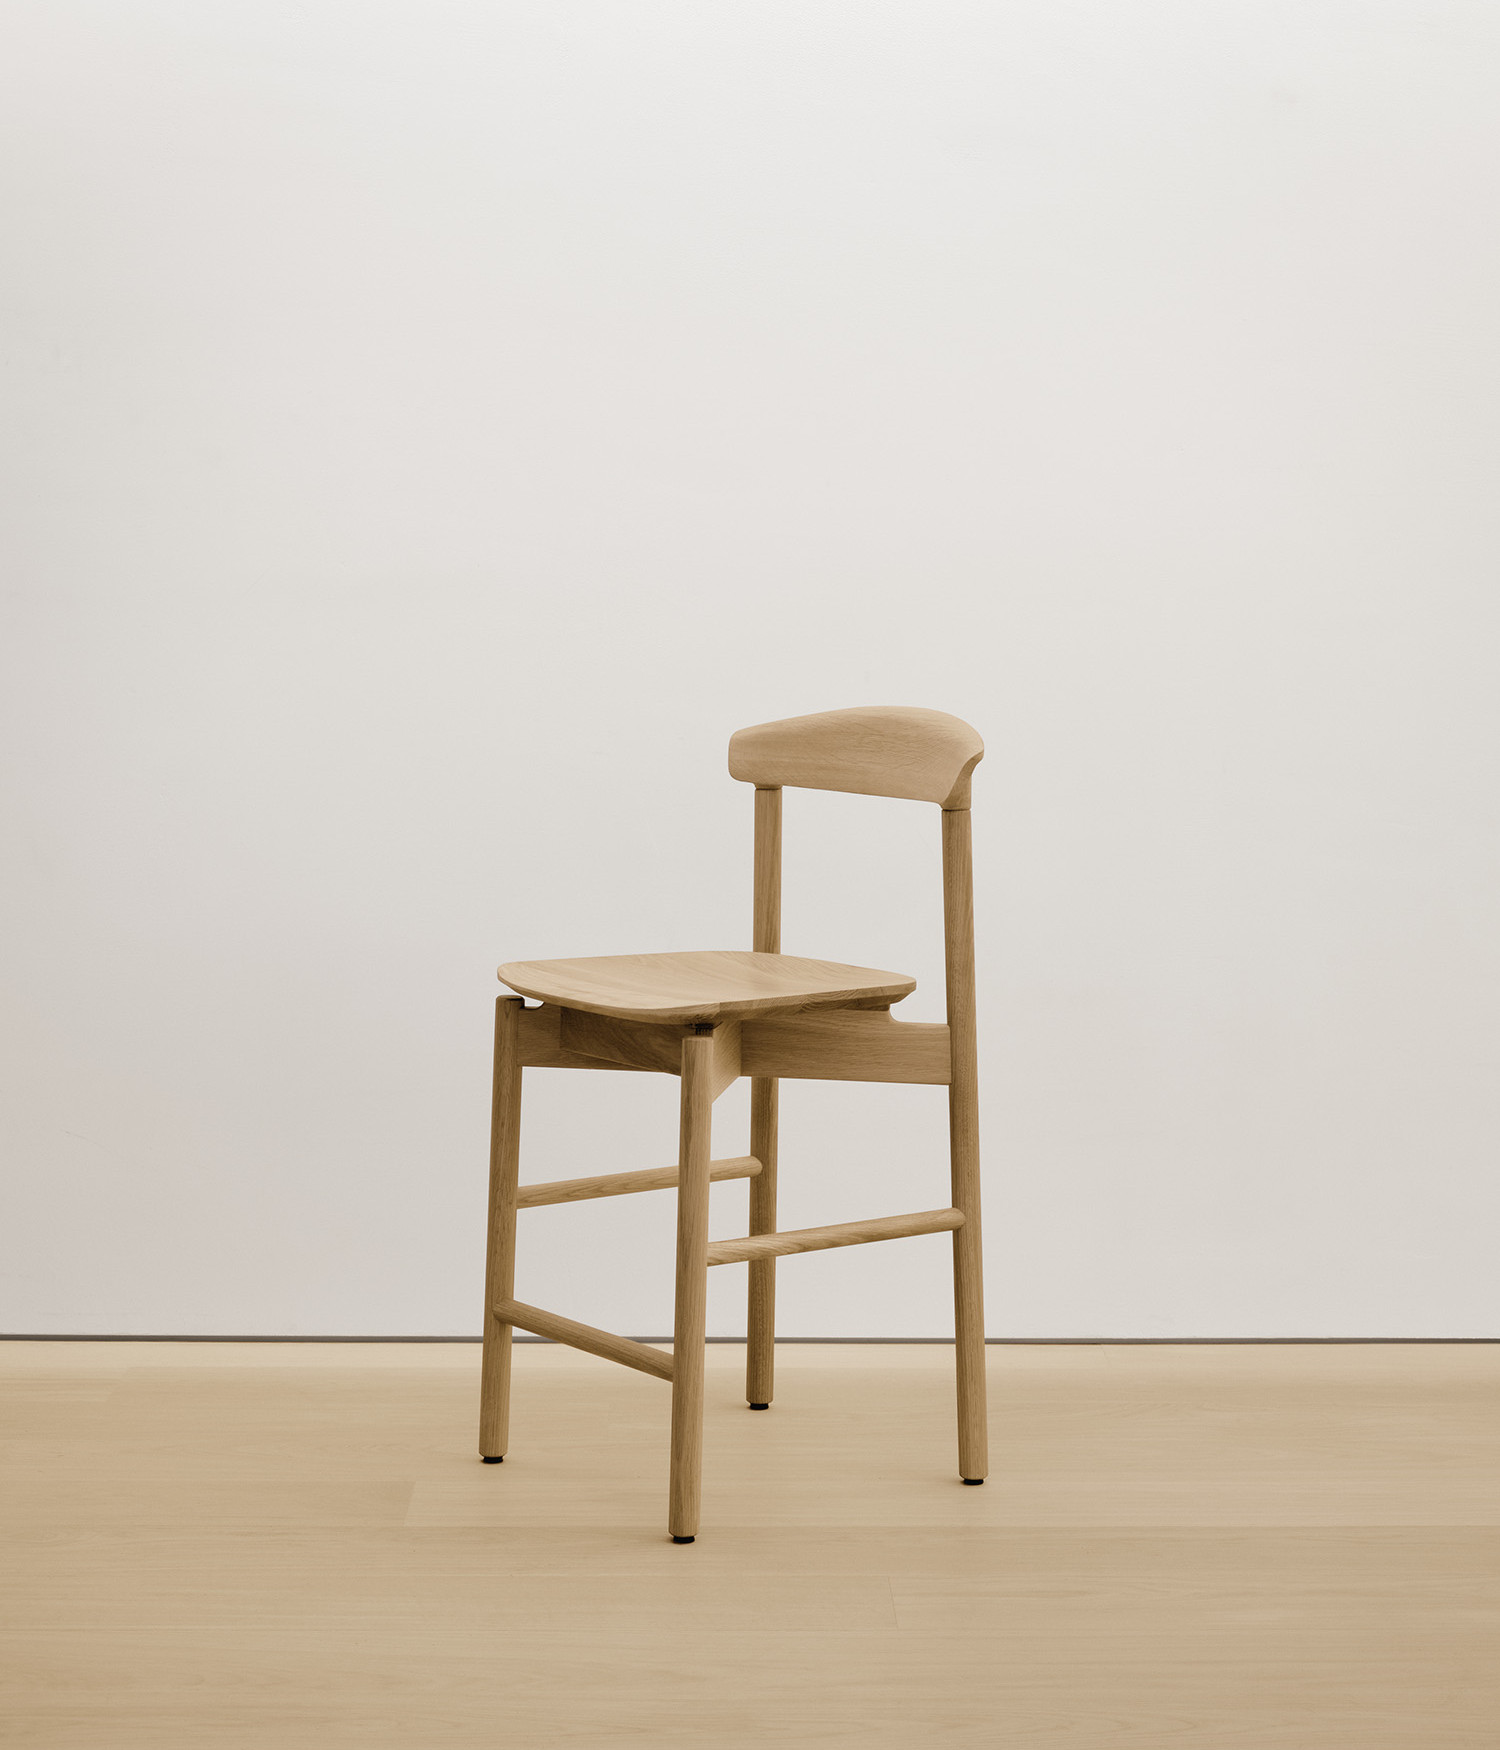  white-oak stool with solid wood seat